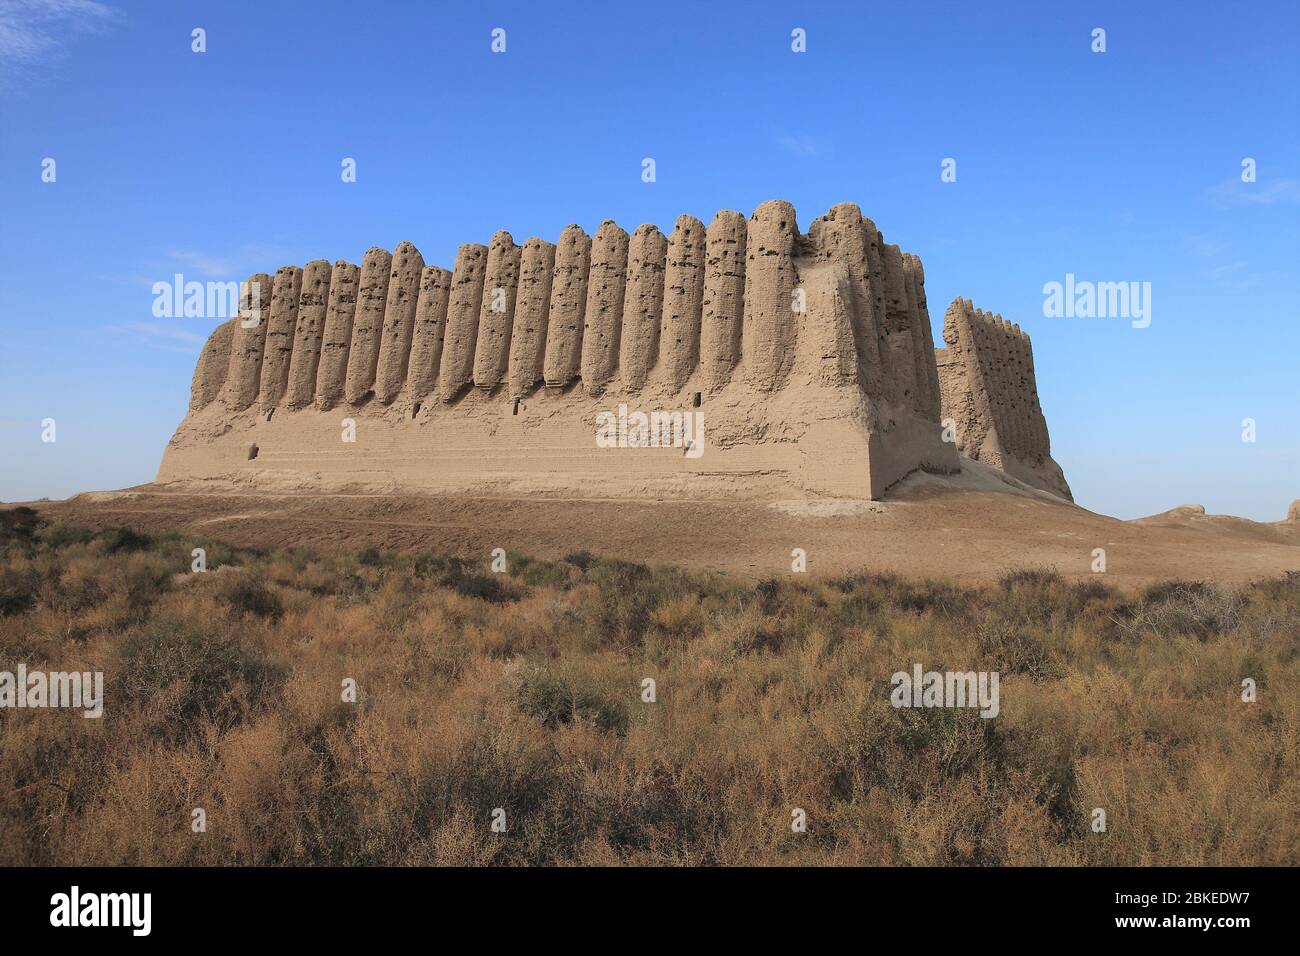 Great Girl Castle is located in the ancient city of Merv in Turkmenistan. The castle was built from mudbrick during the Seljuk period. Stock Photo